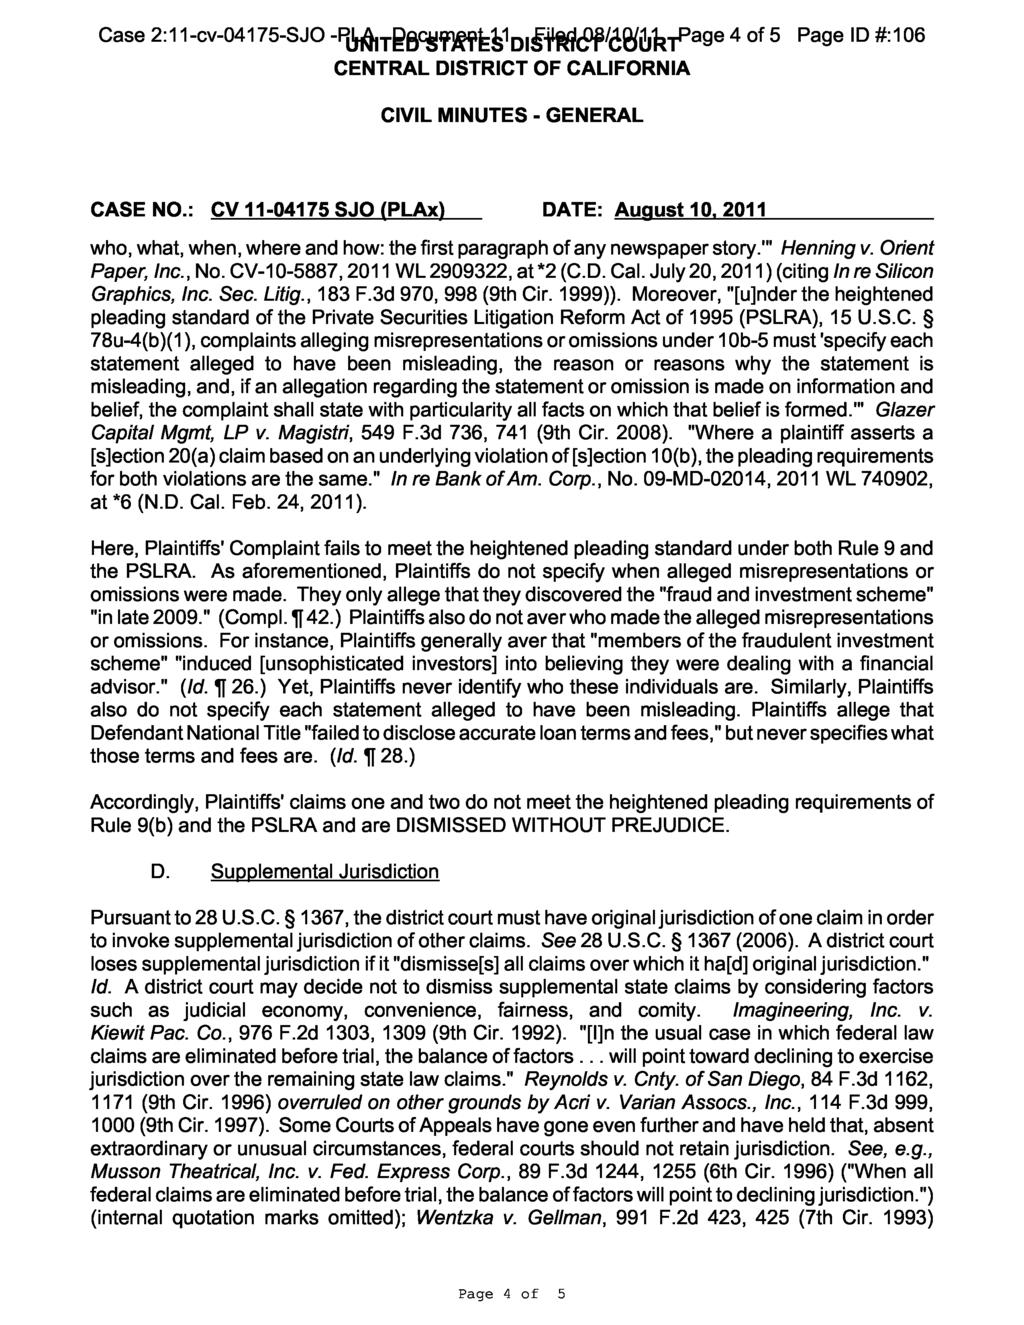 Case 2:11-cv-04175-SJO -PLA Document 11 Filed 08/10/11 Page 4 of 5 Page ID #:106 who, what, when, where and how: the first paragraph of any newspaper story.'" Henning v. Orient Paper, Inc., No.